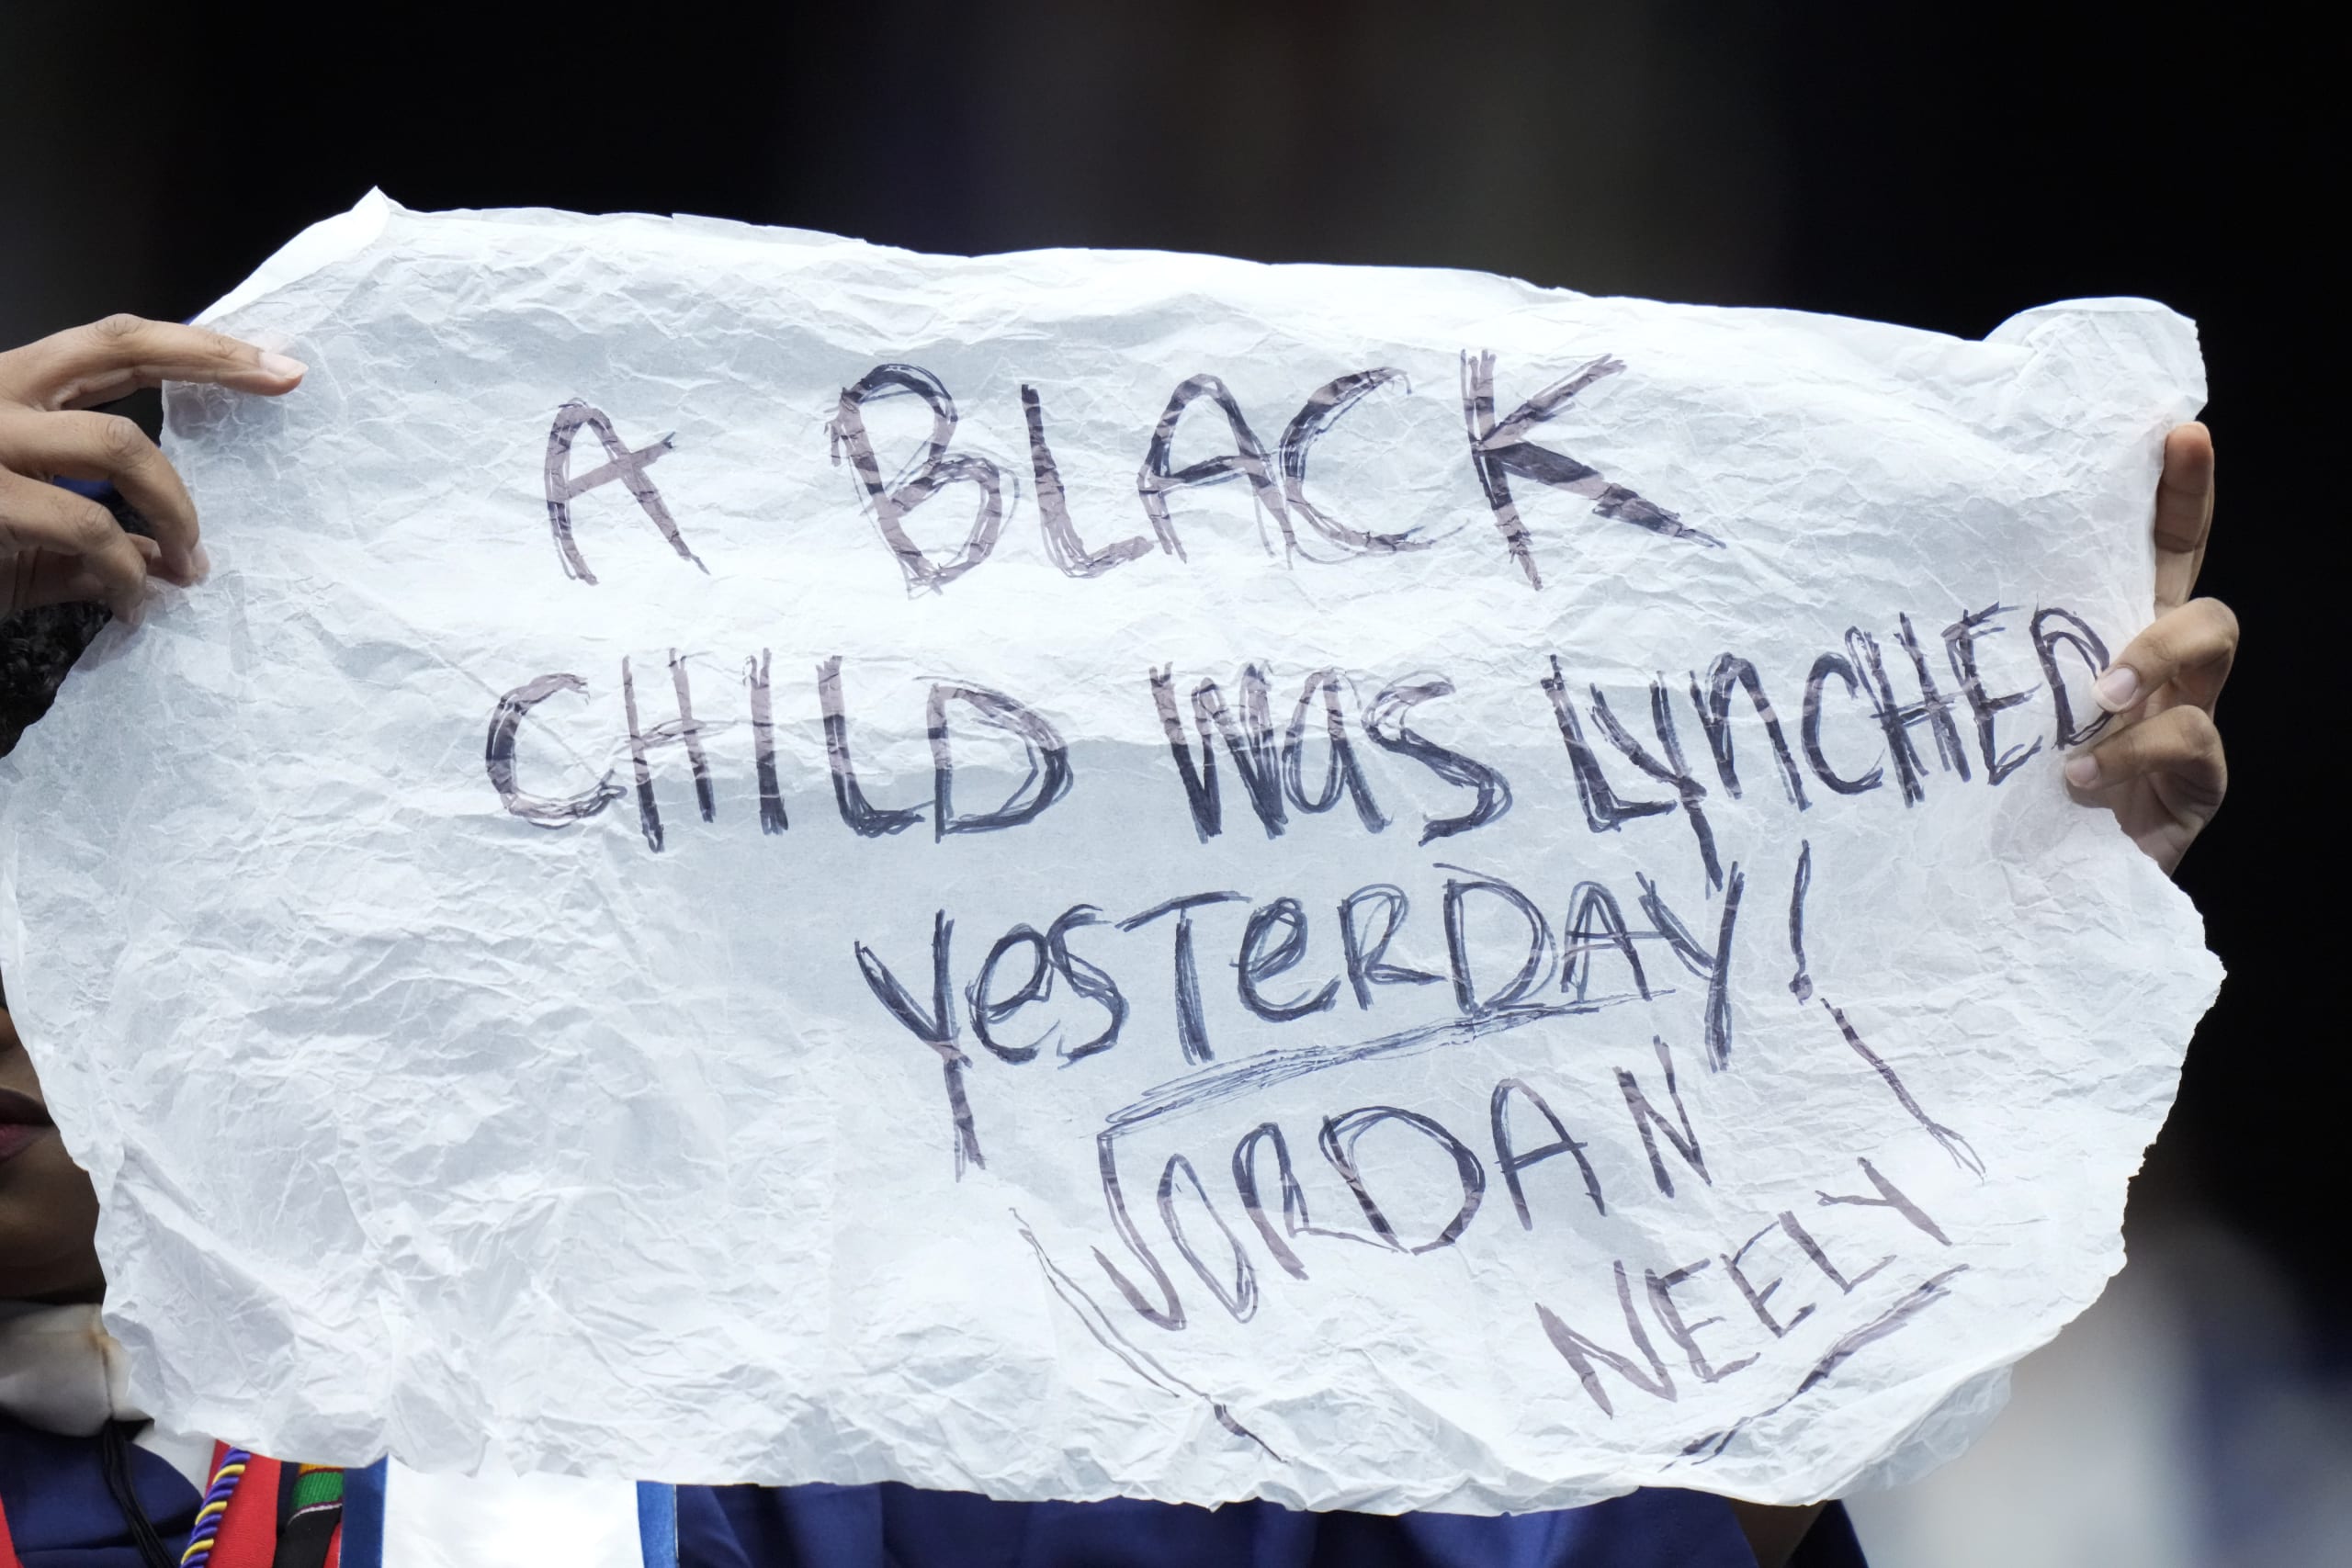 Jordan Neely’s death reminds us of the lynching atmosphere that still exists for Black people